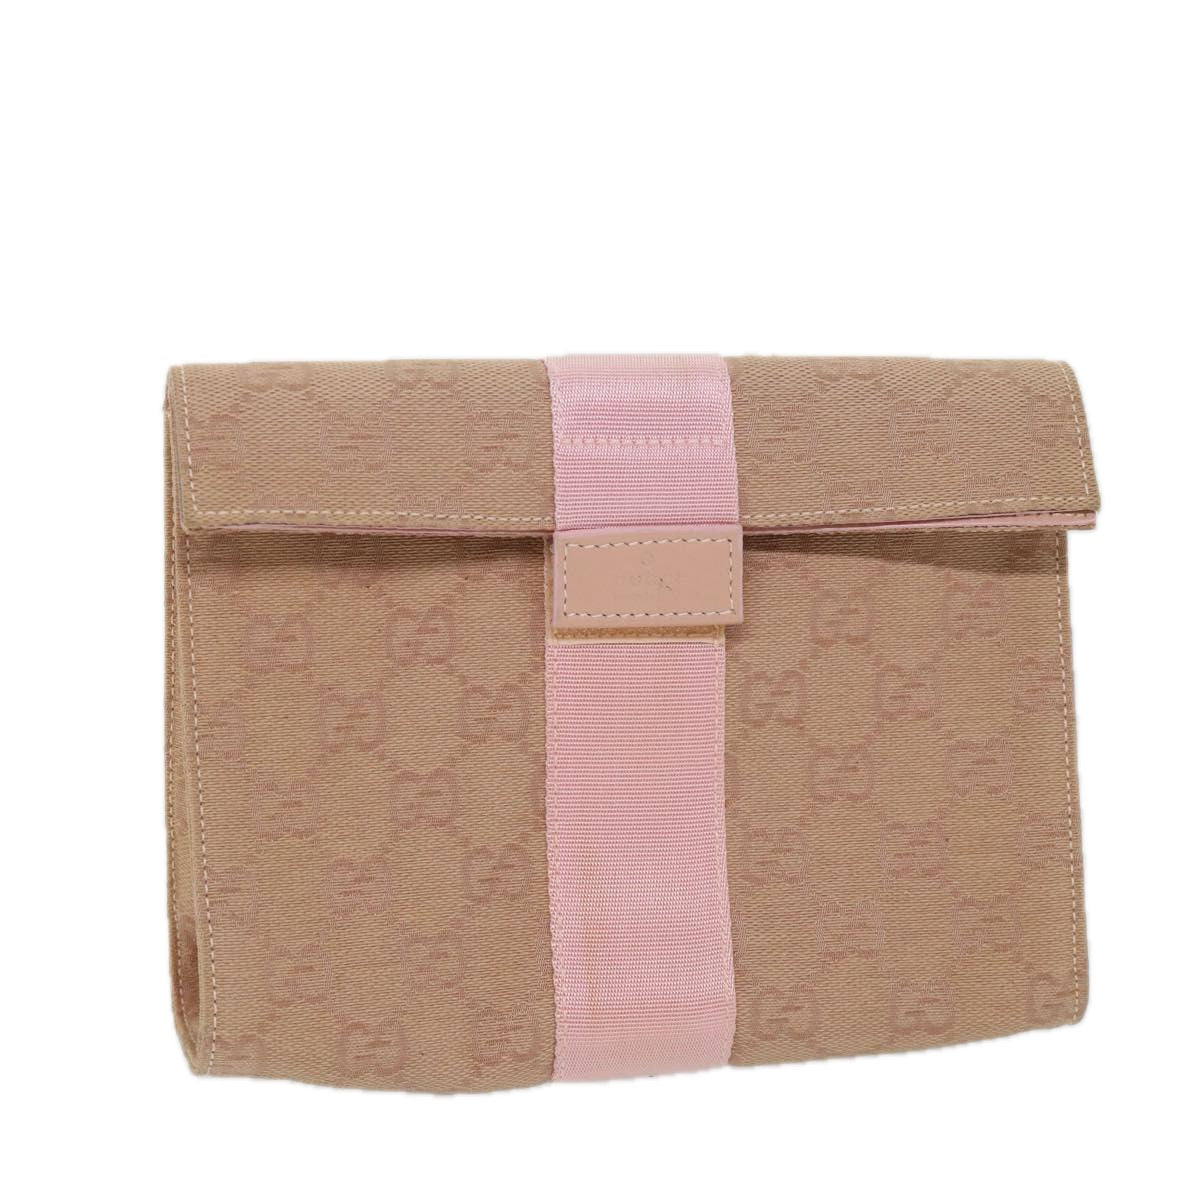 GUCCI GG Canvas Clutch Bag Pink 039 0992 Auth 69230